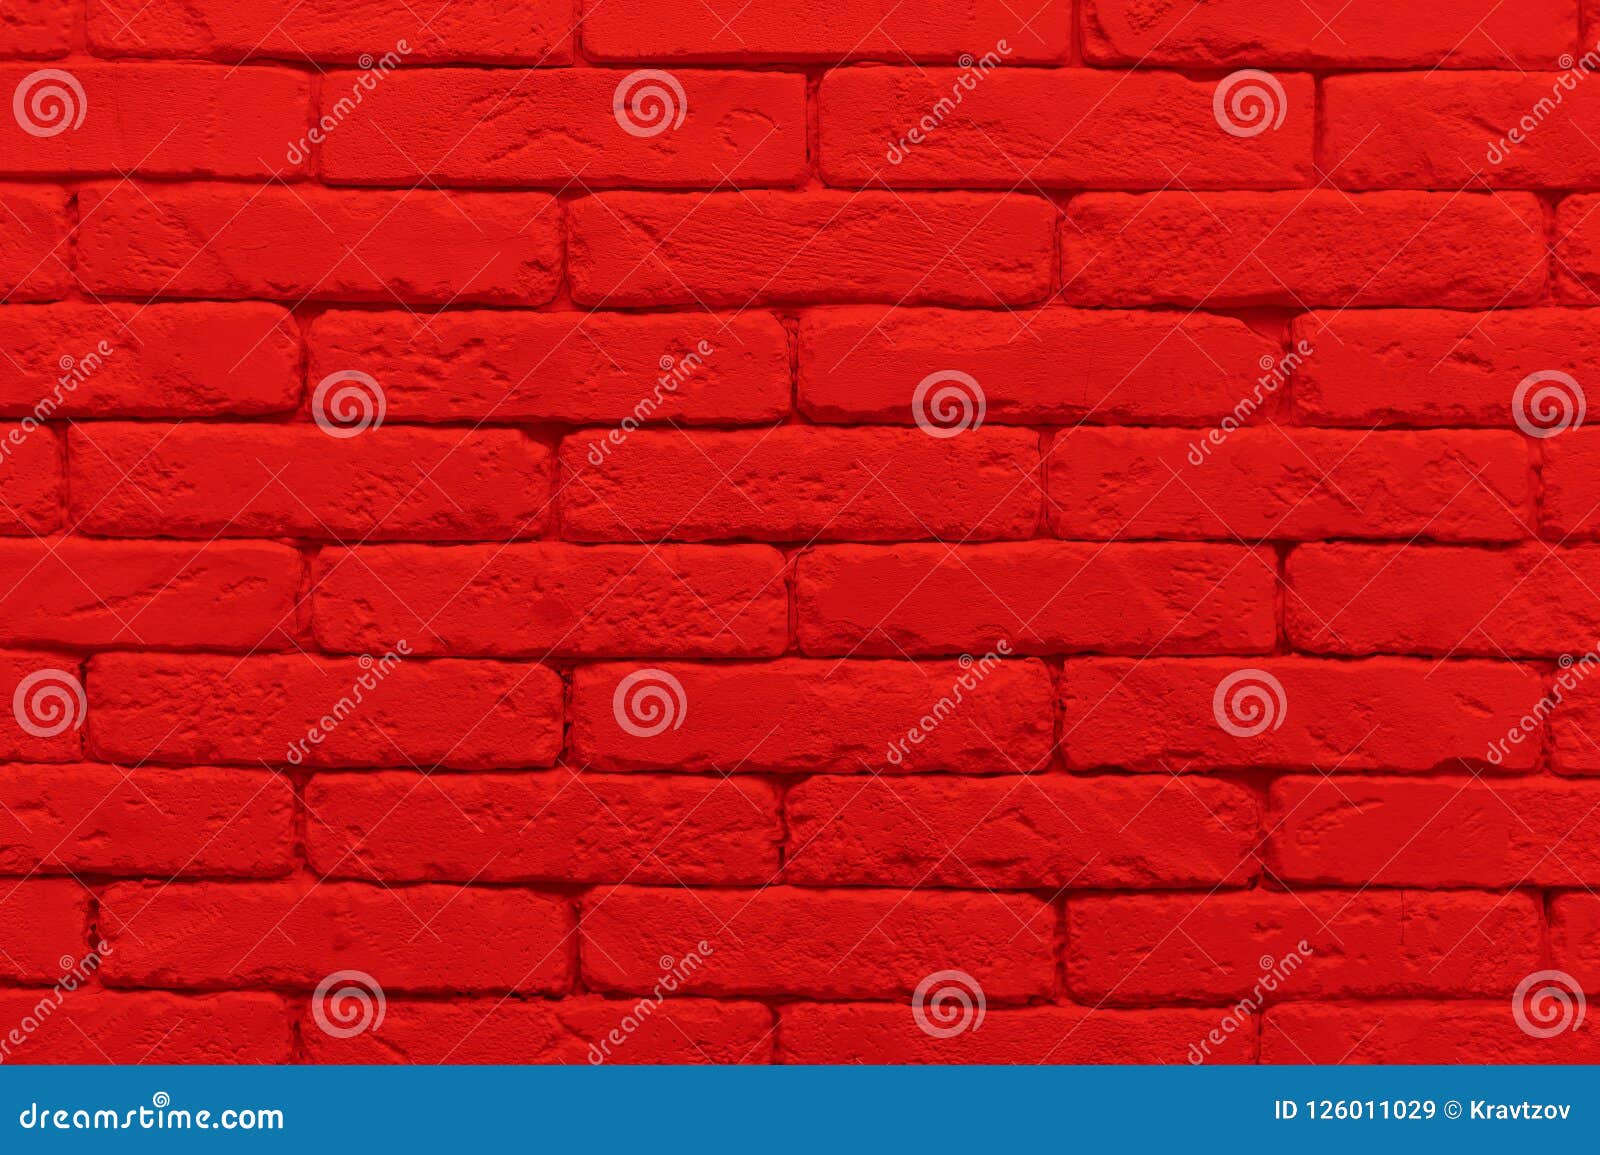 Saturated Red Wall